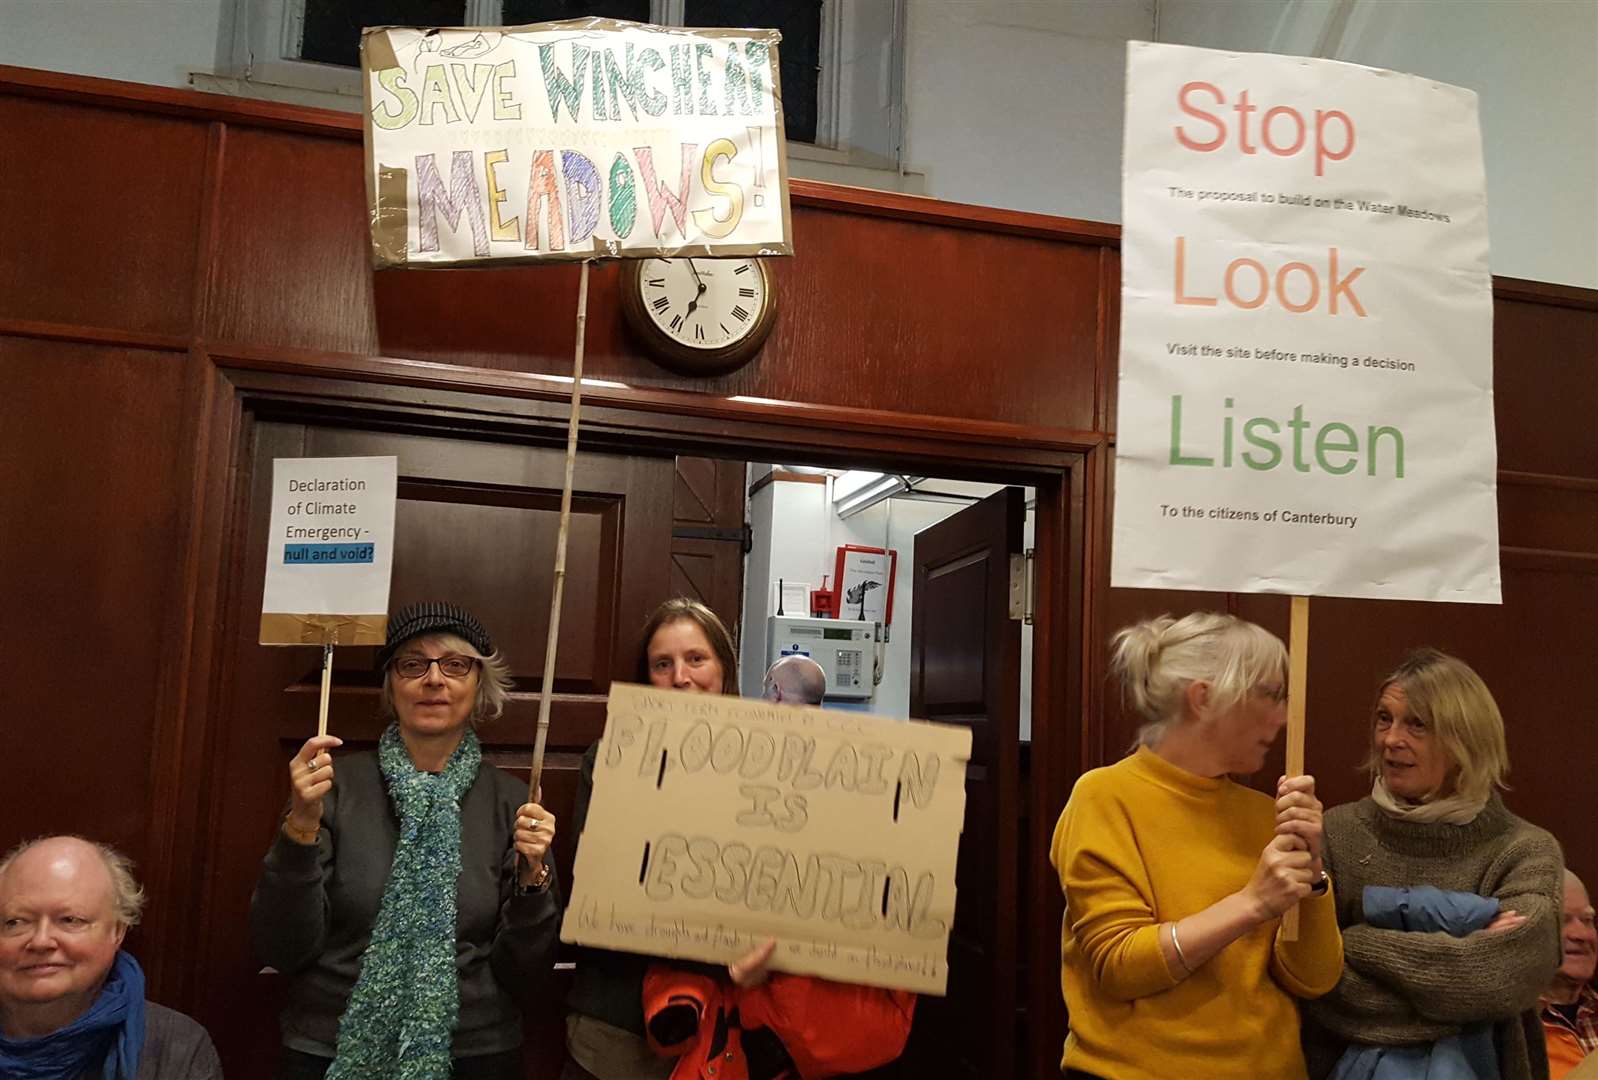 Protesters at the meeting